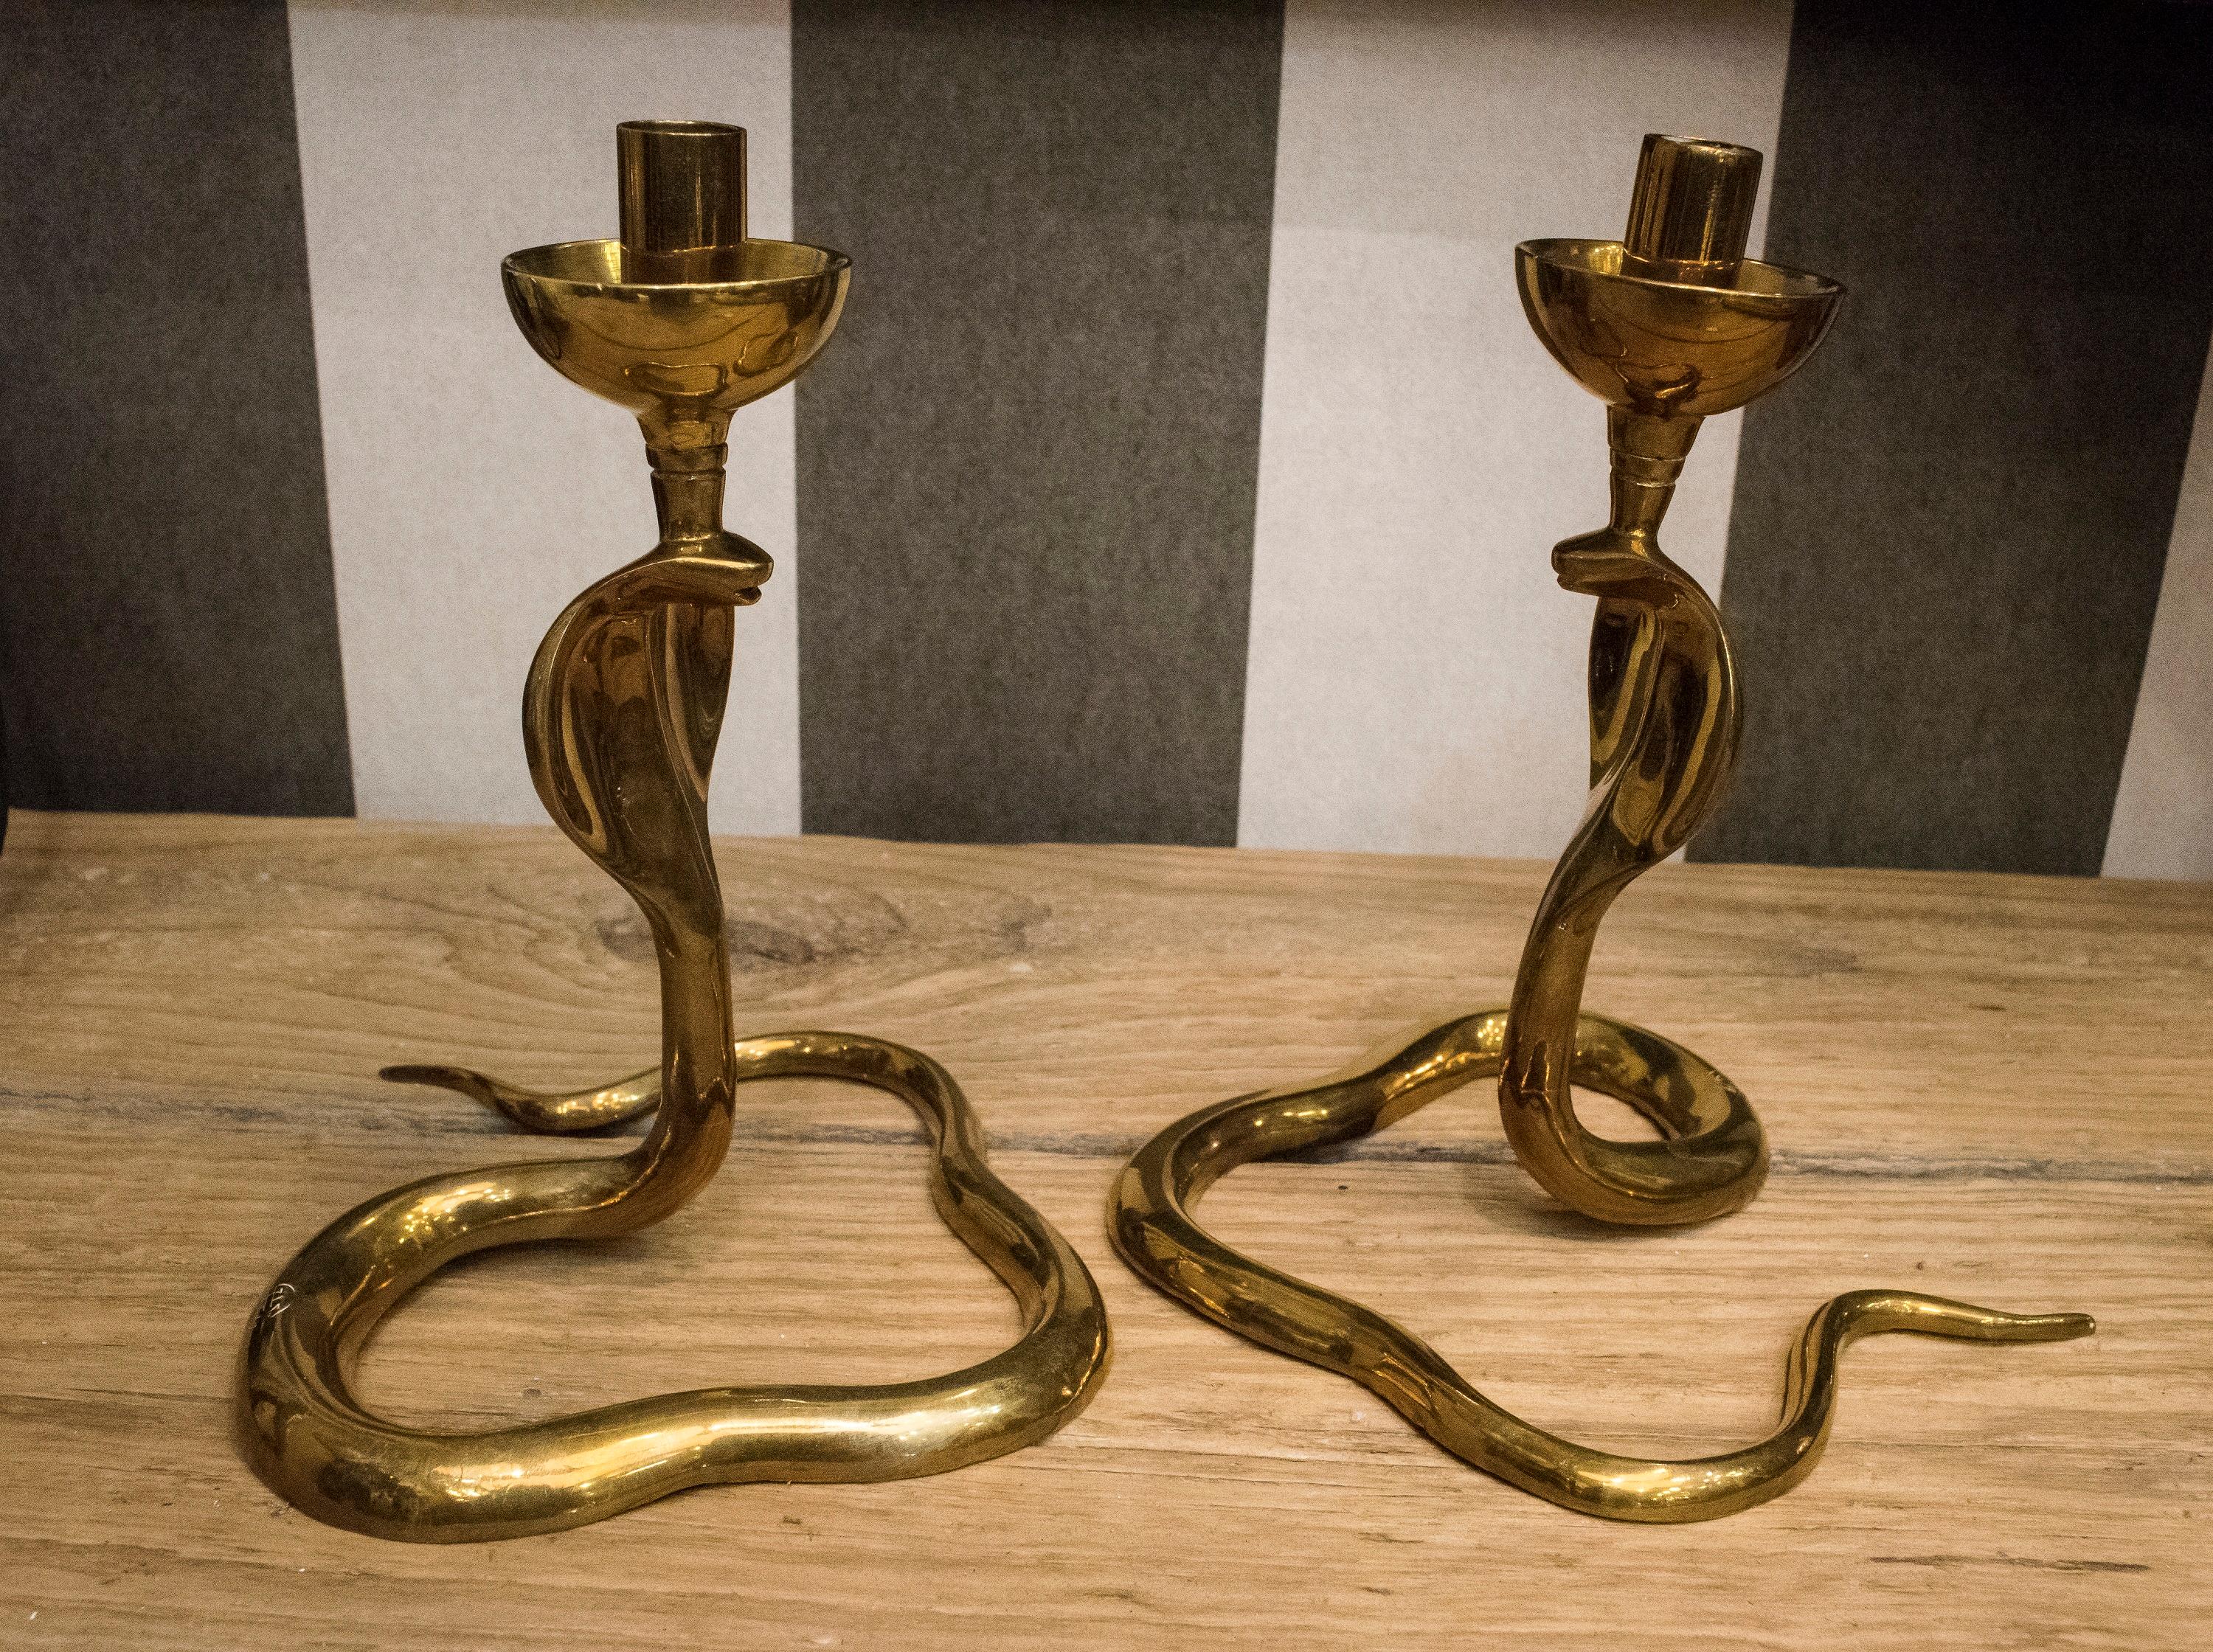 Awesome and fun couple of cobra-shaped golden brass candelsticks, Italian desig,
with contrasts, a very nice detail for any corner.